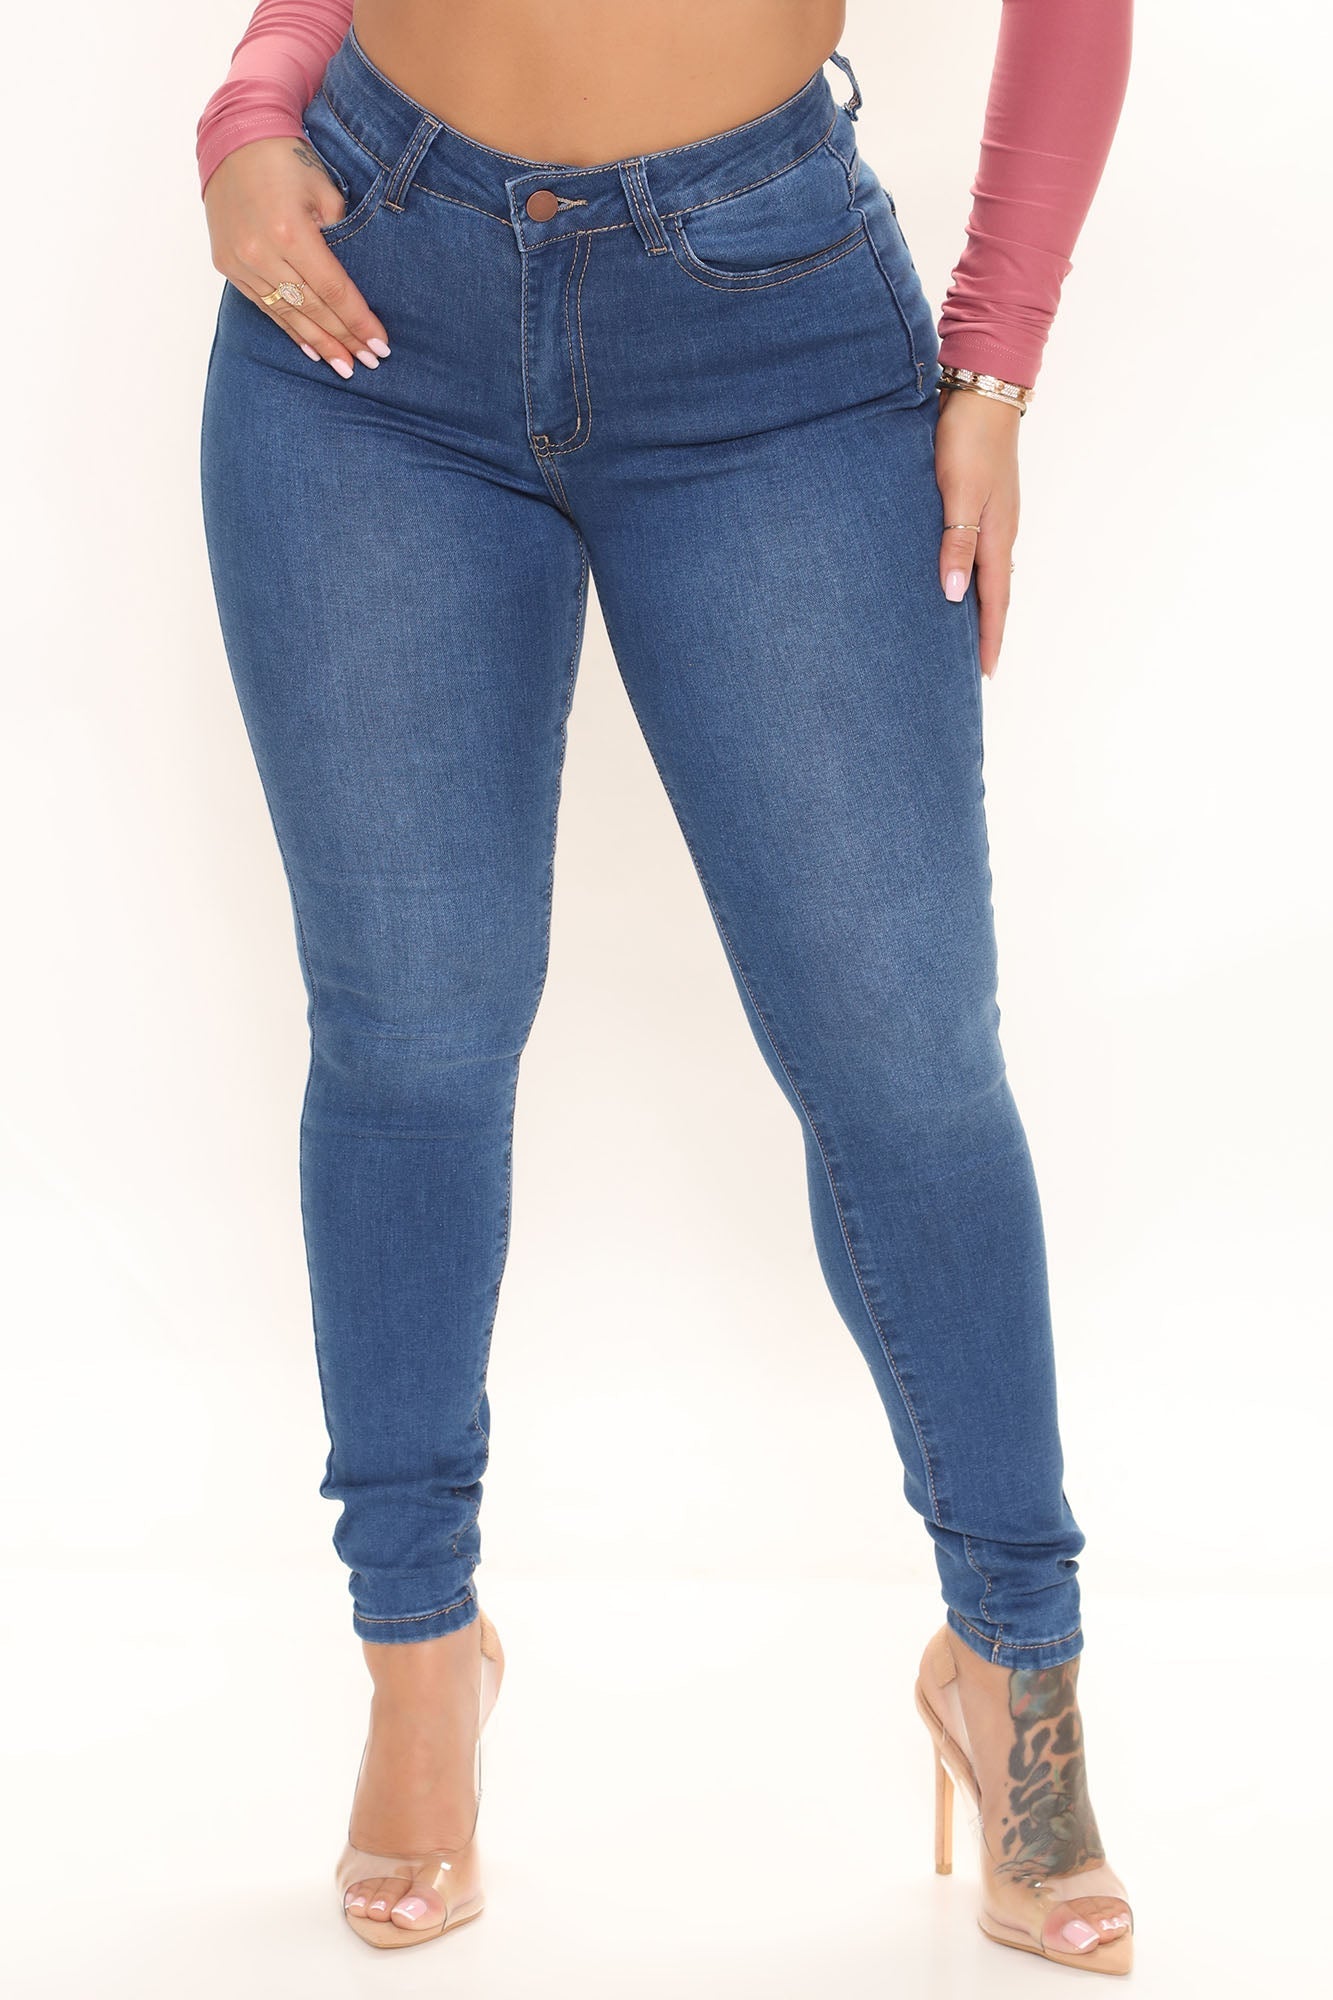 Love Is A Game Skinny Jeans - Medium Blue Wash